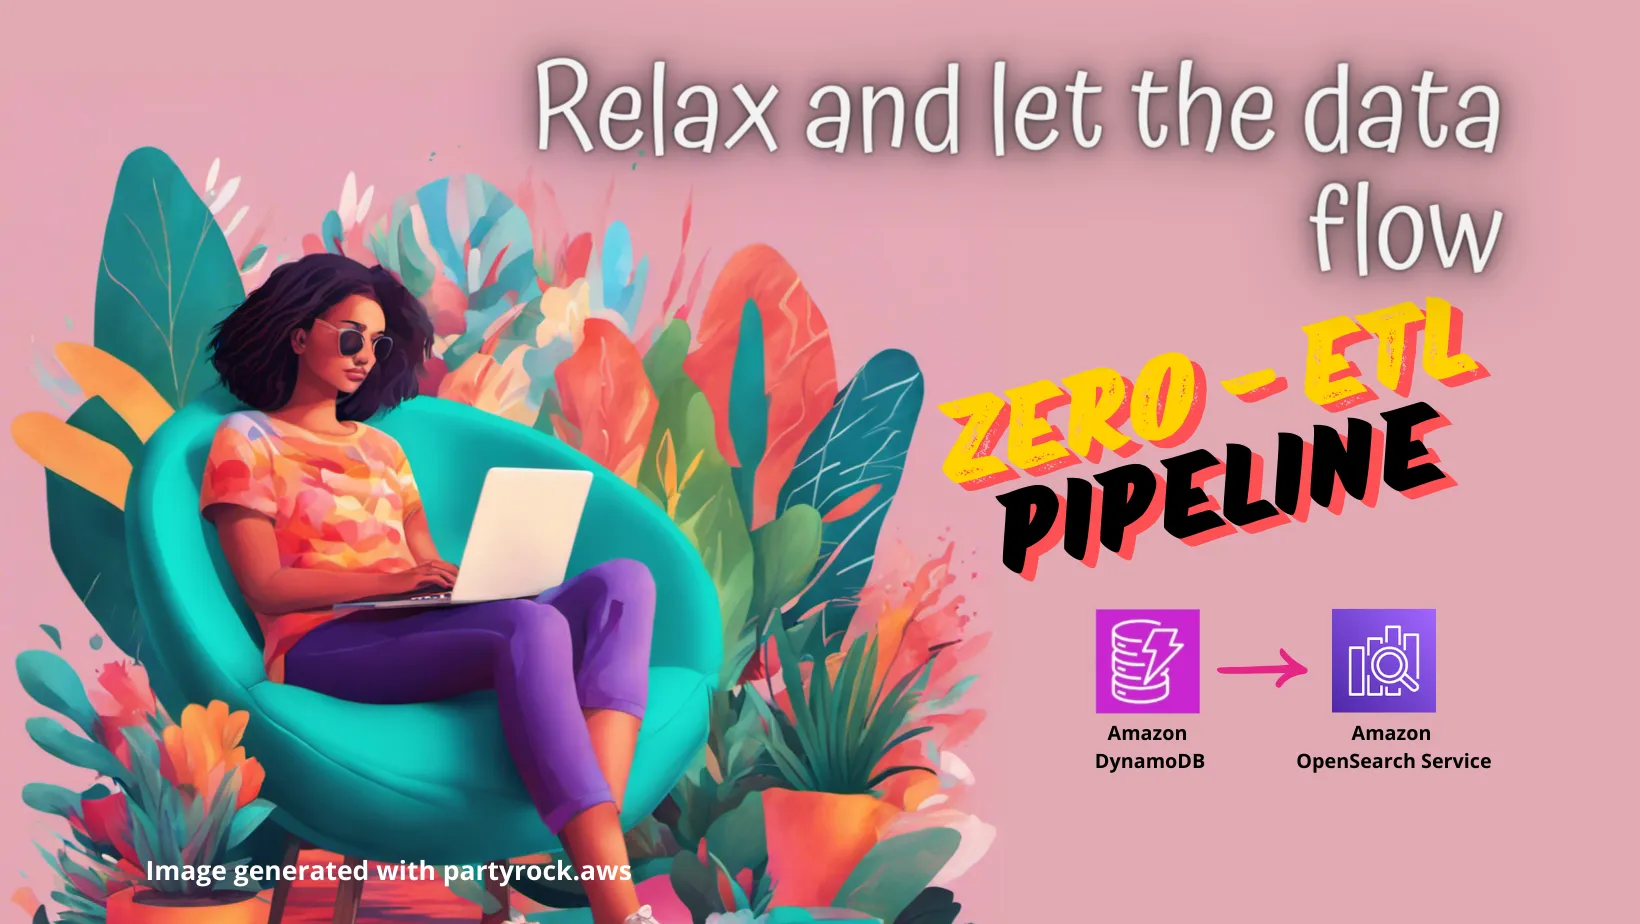 Relax and let the data flow: A Zero-ETL Pipeline